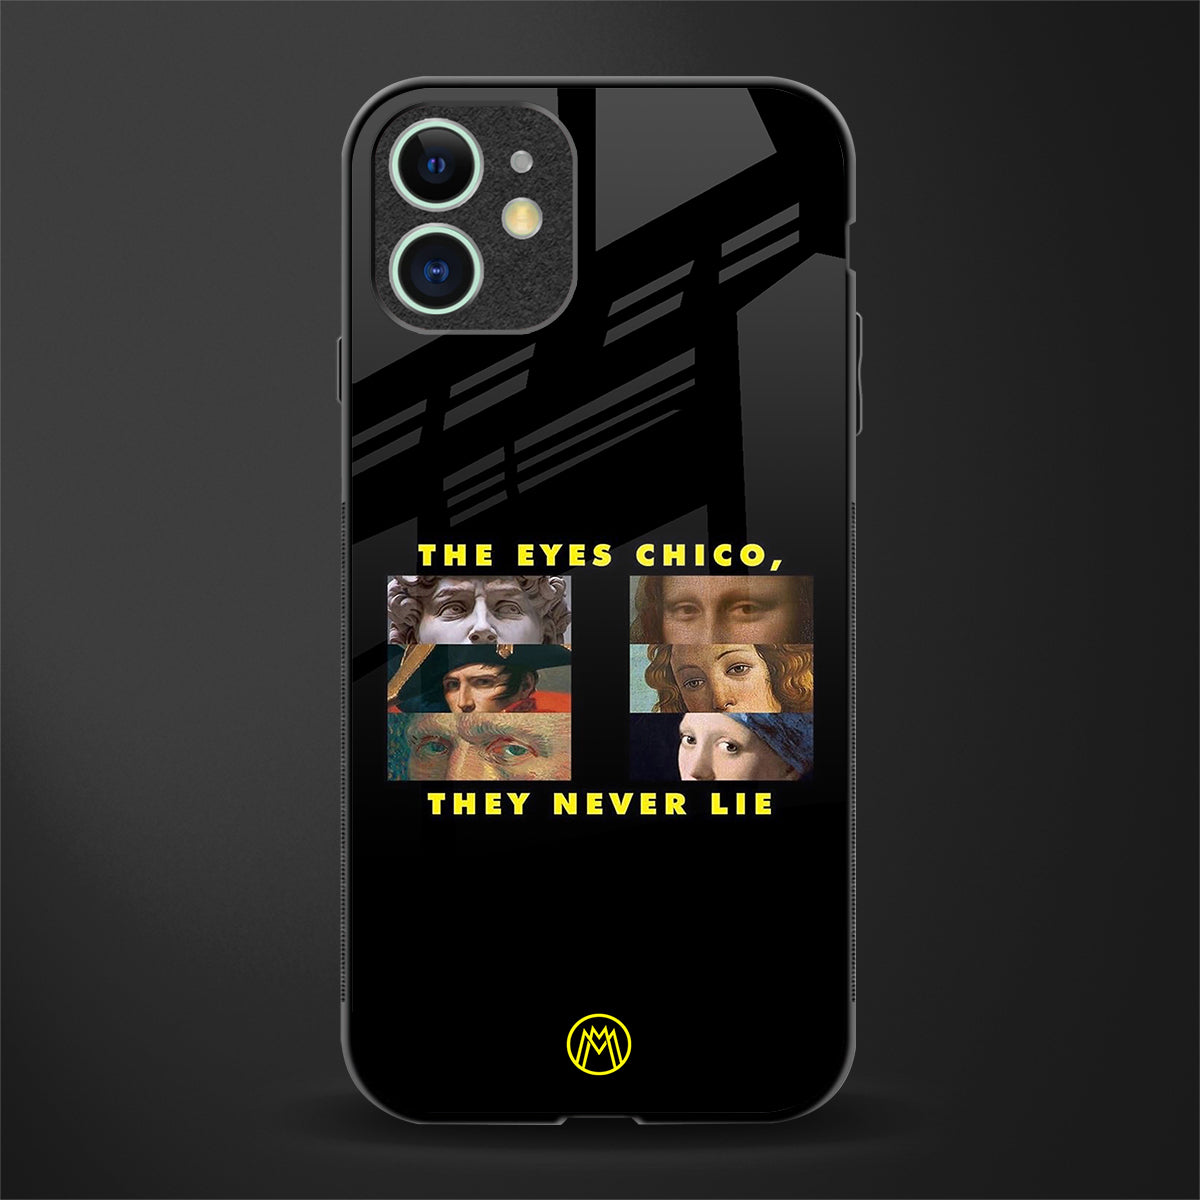 the eyes chico, they never lie movie quote glass case for iphone 12 mini image